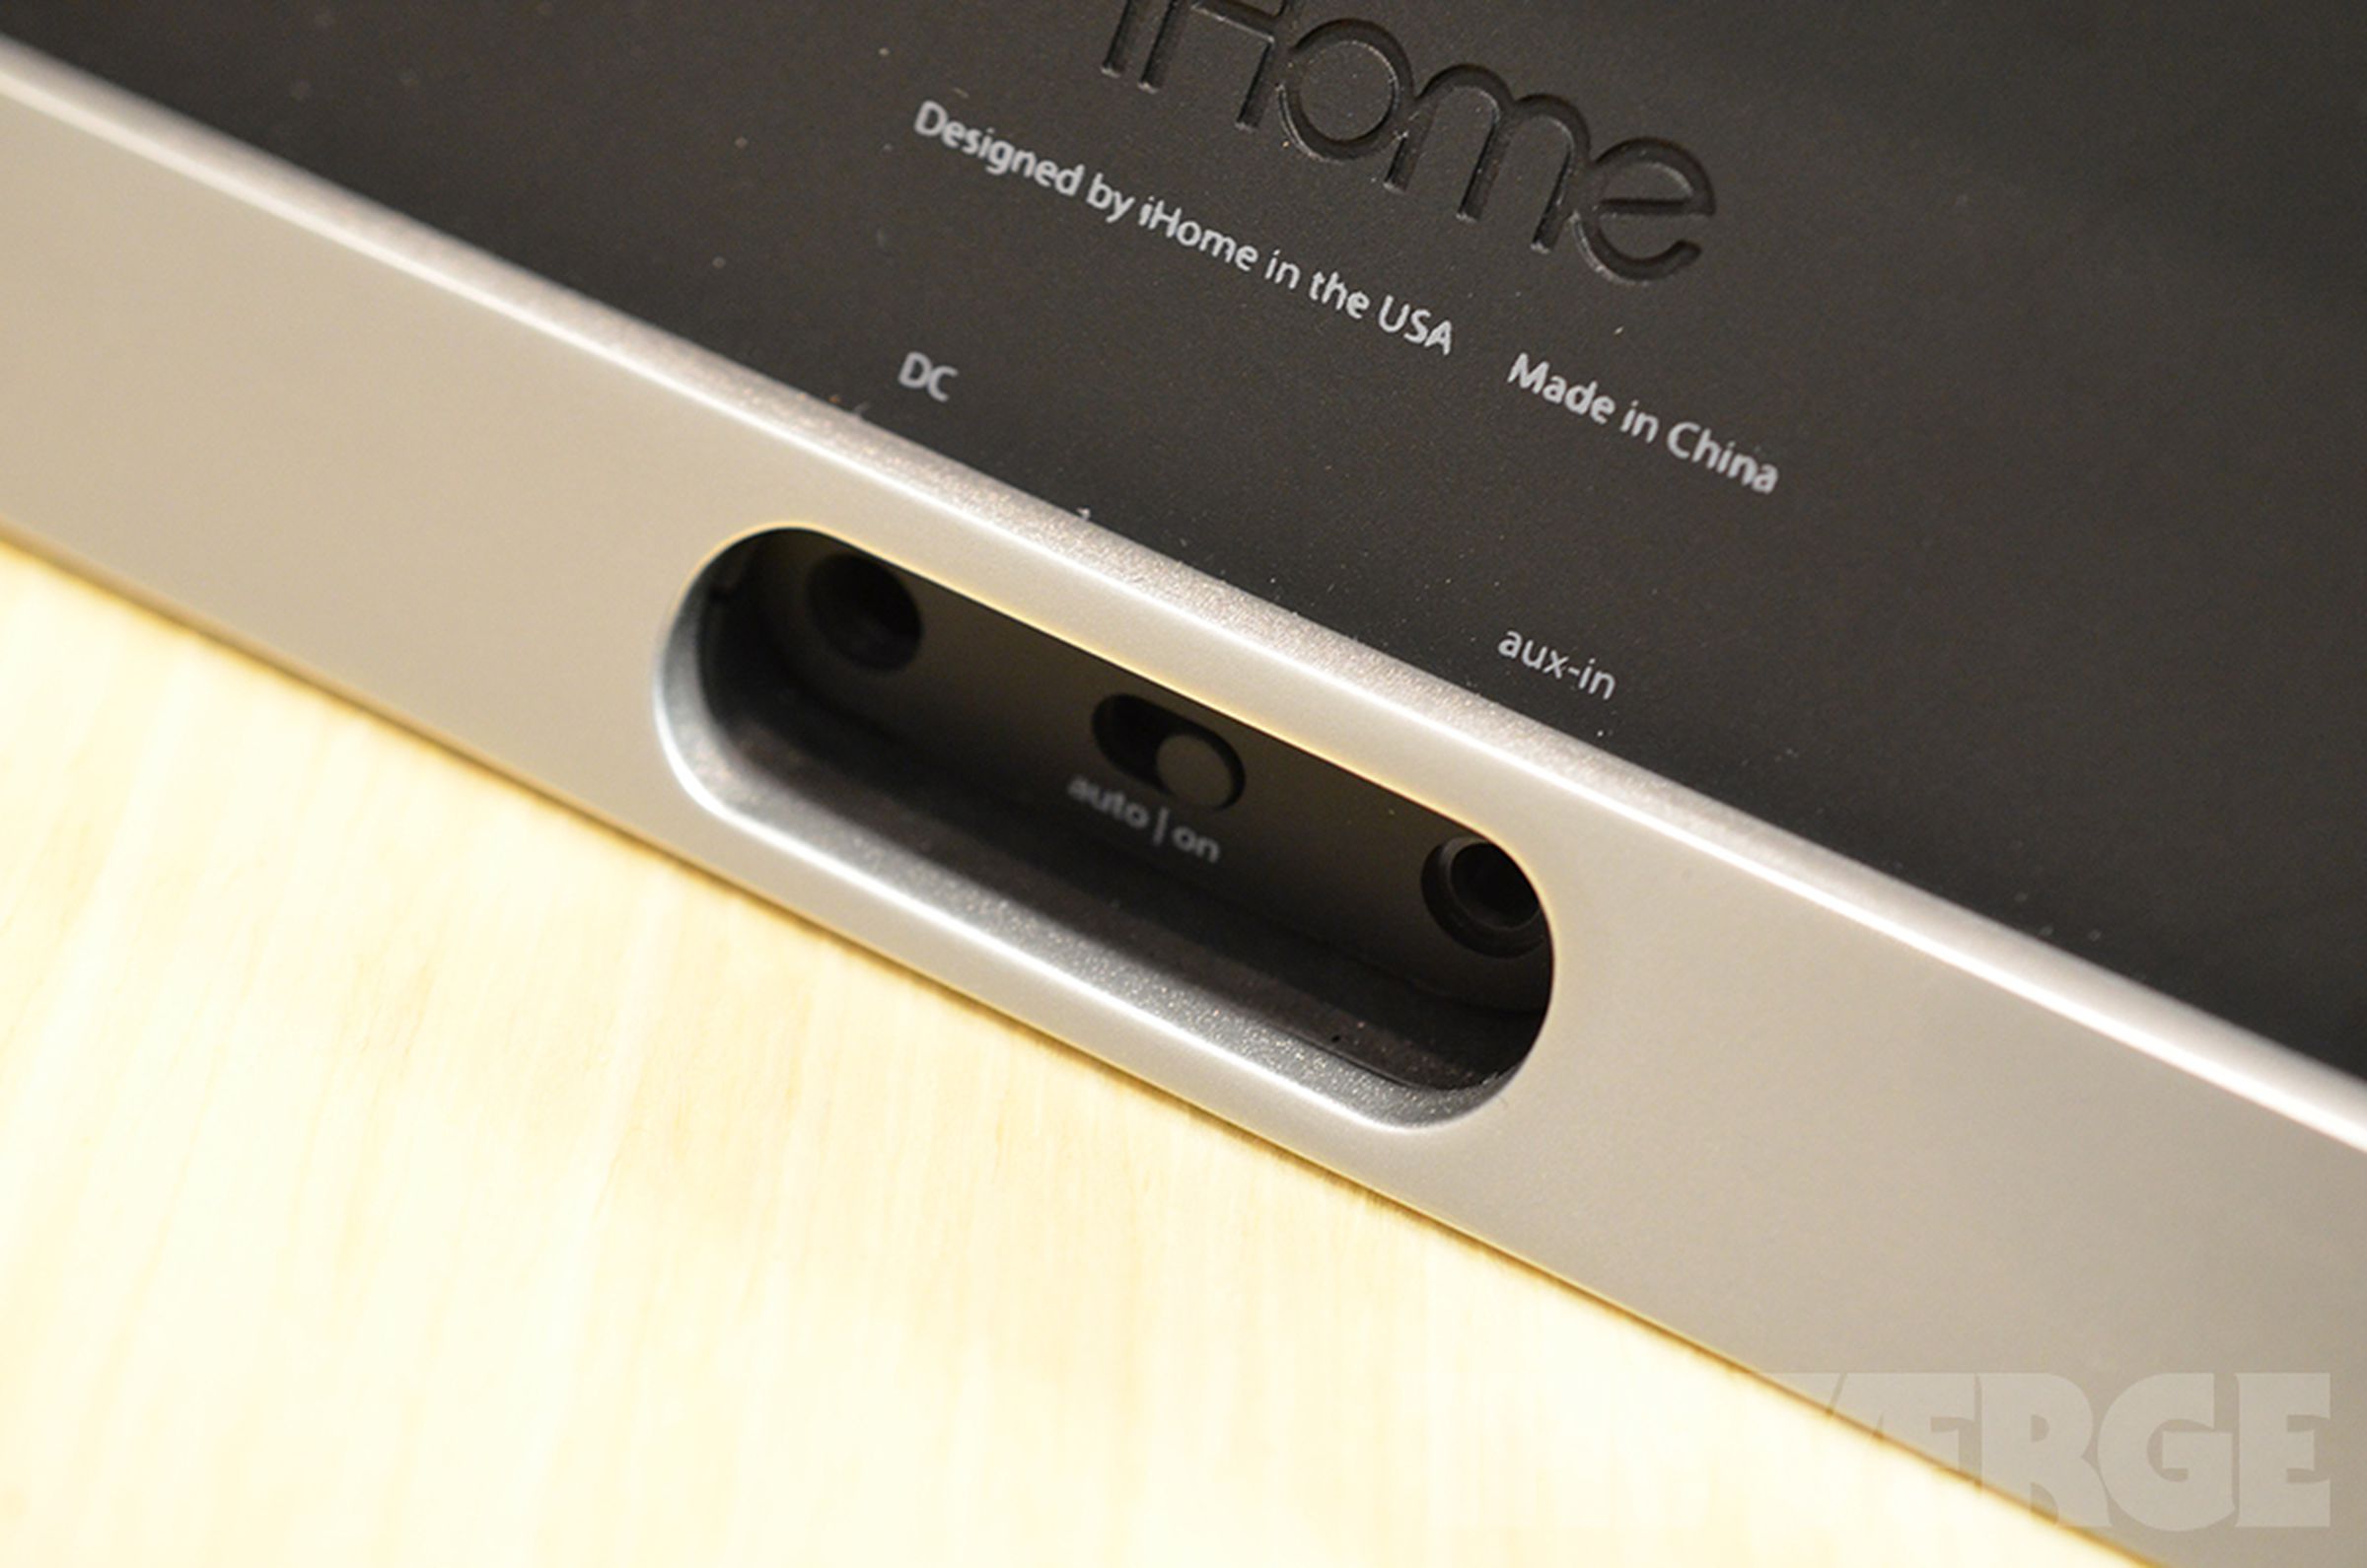 iHome iD11 Bluetooth iPhone and iPad speaker (hands-on photos)